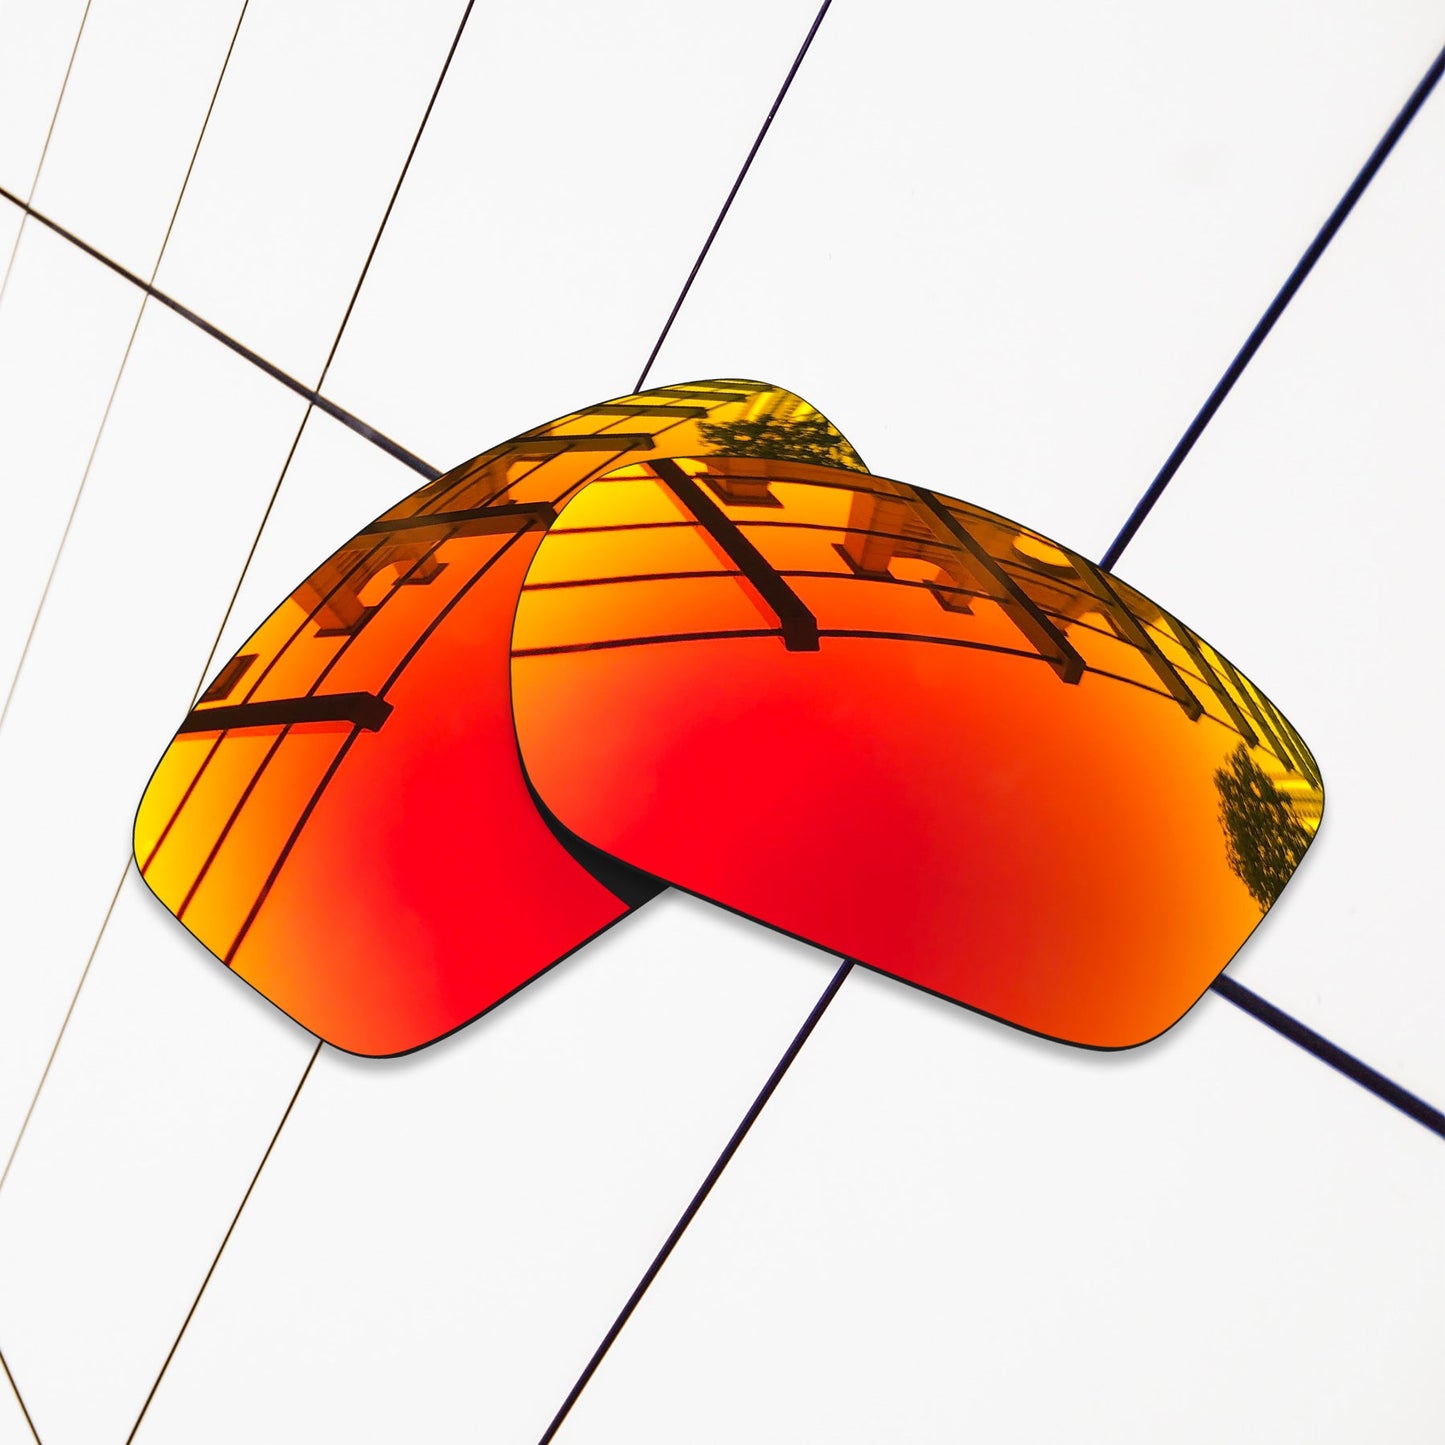 Polarized Replacement Lenses for Oakley Sliver Stealth Sunglasses